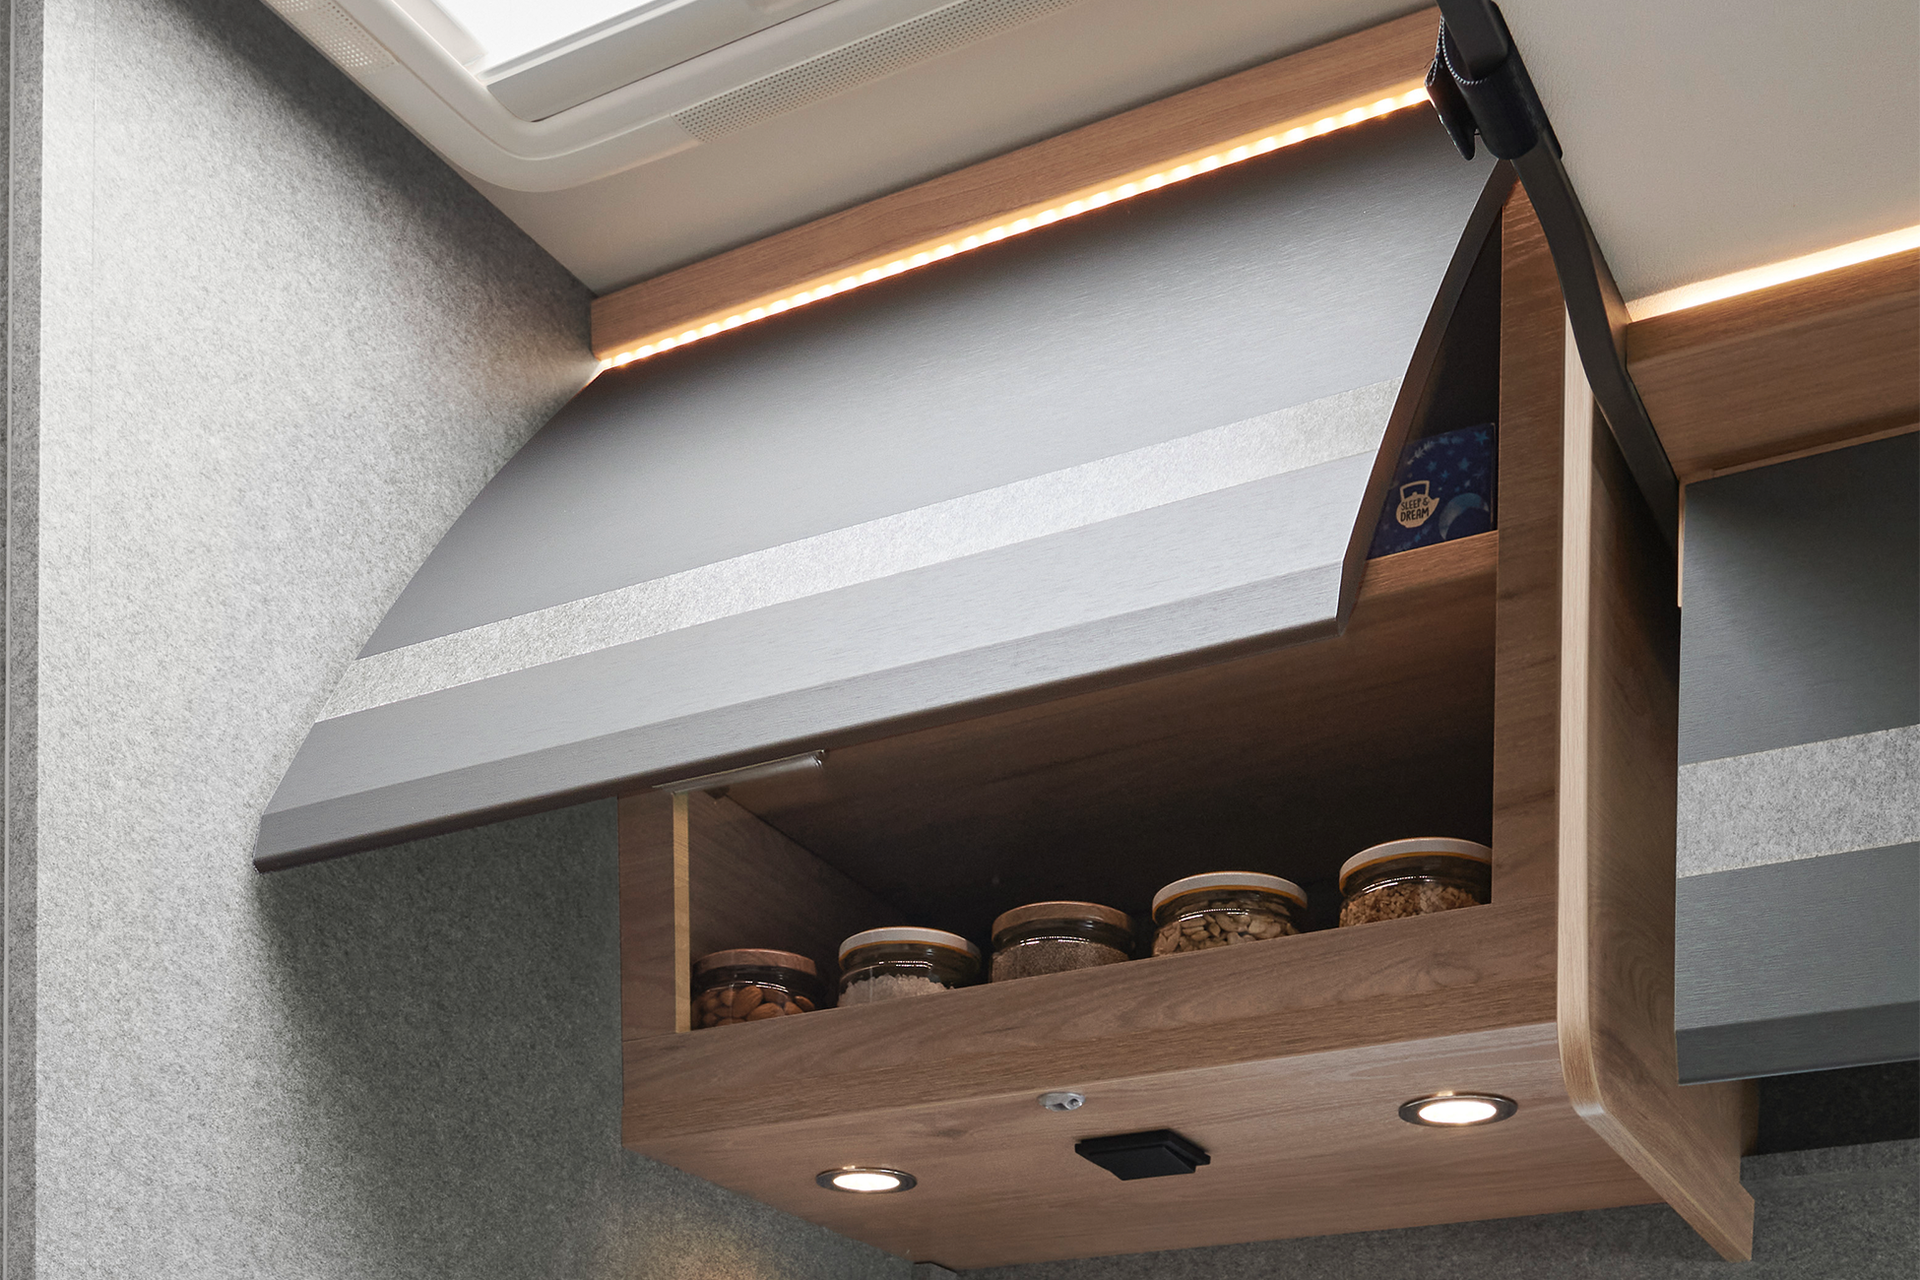 The overhead lockers are equipped with a softclose function and are indirectly illuminated